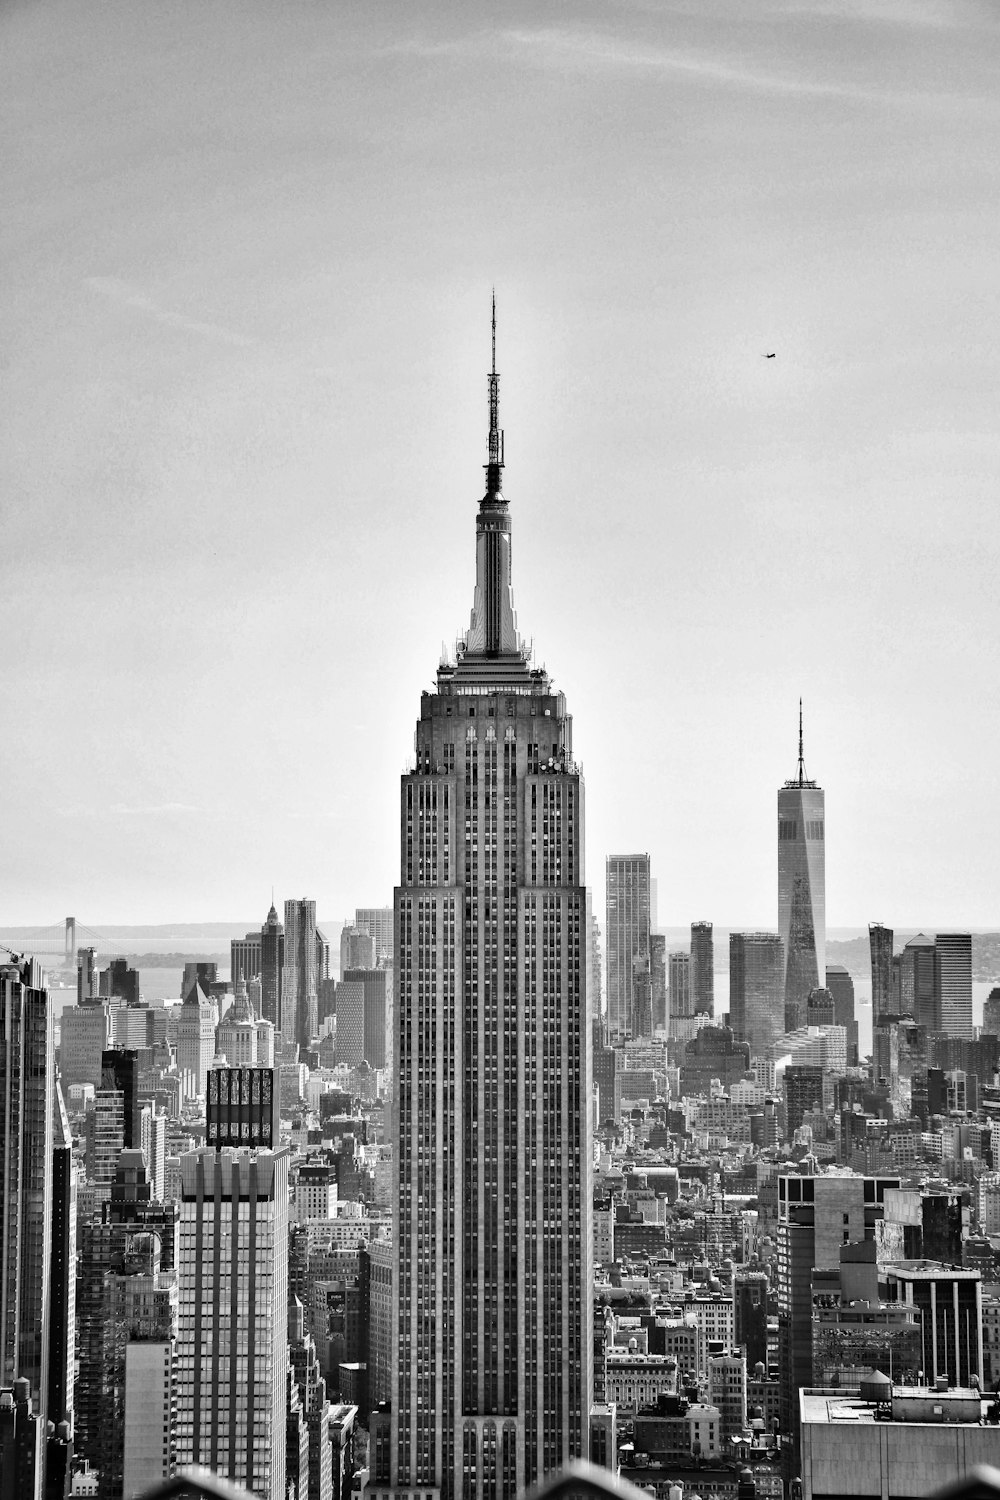 Empire State Building skyline with a tall building